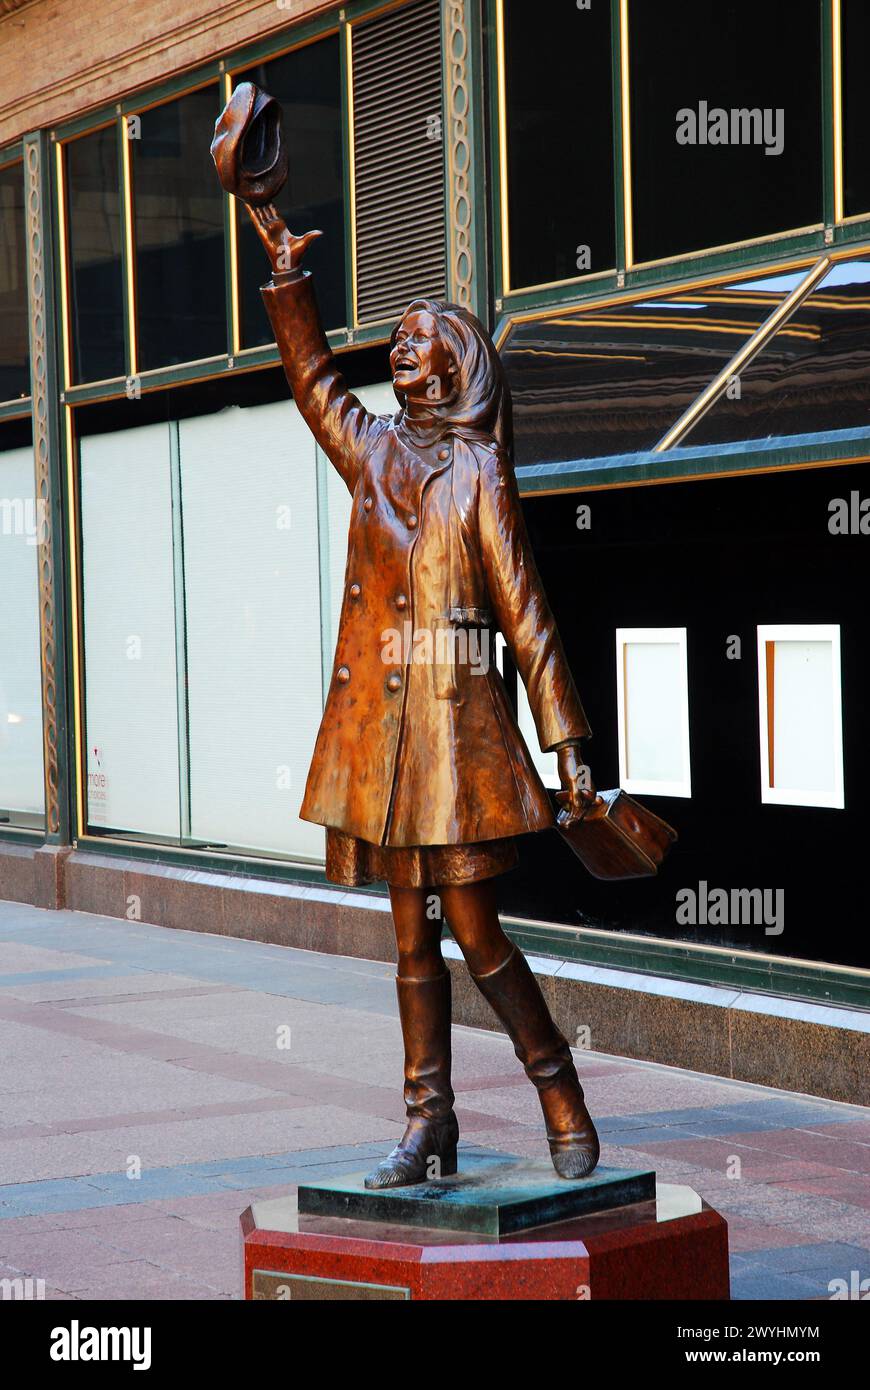 You're Gonna make it After All, a sculpture of actress Mary Tyler Moore stands in downtown Minneapolis and is seen tossing her hat in the air, Stock Photo